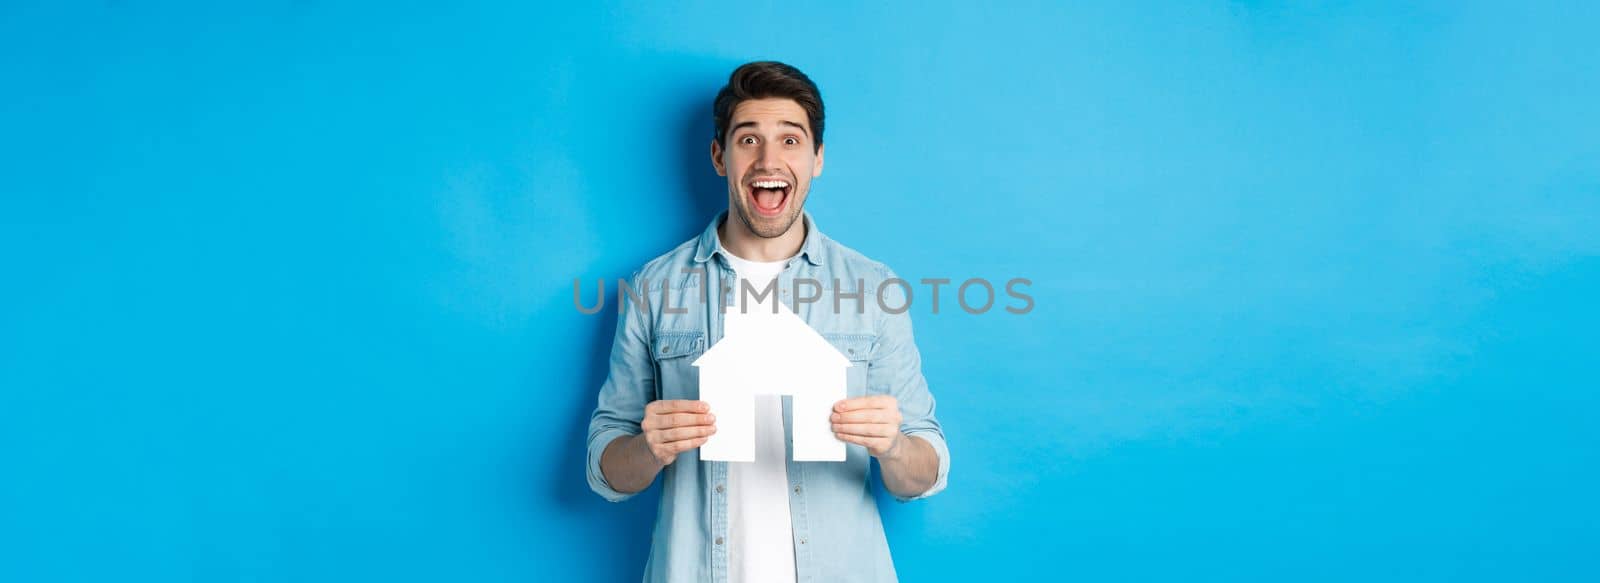 Insurance, mortgage and real estate concept. Happy man holding house model and smiling excited, buying property or renting apartment, standing against blue background.